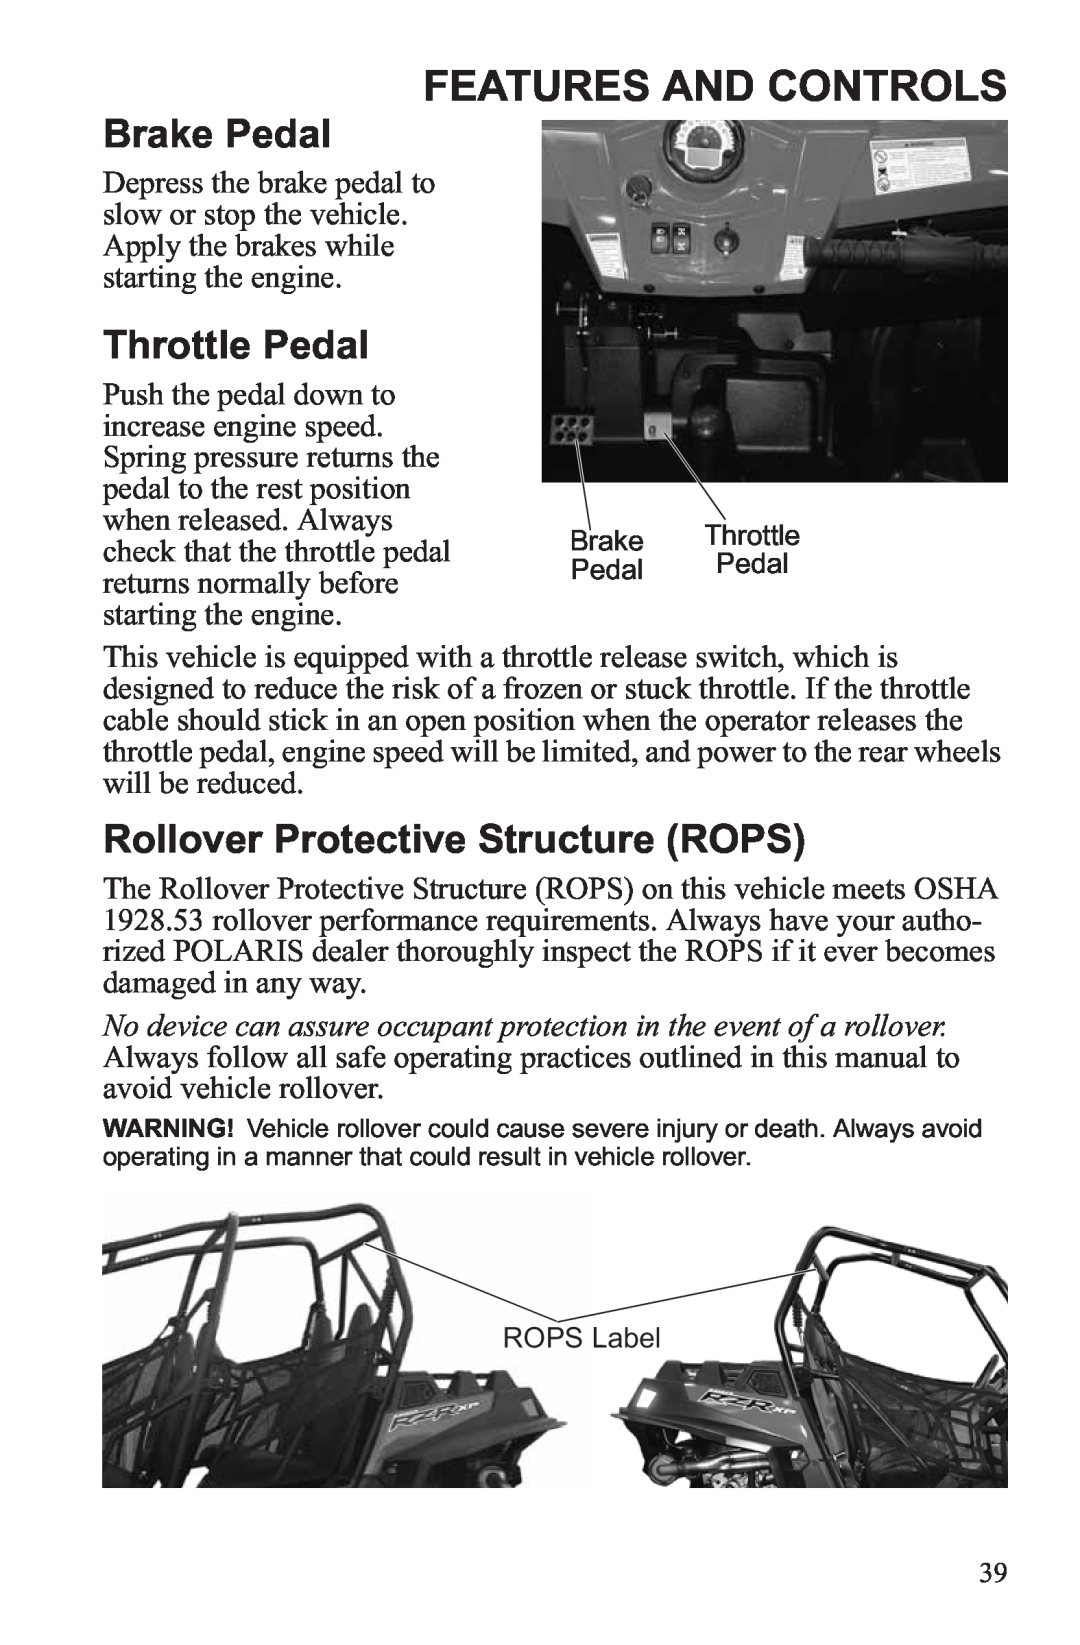 Polaris RZR XP 900 Features And Controls, Brake Pedal, Throttle Pedal, Rollover Protective Structure ROPS, ROPS Label 